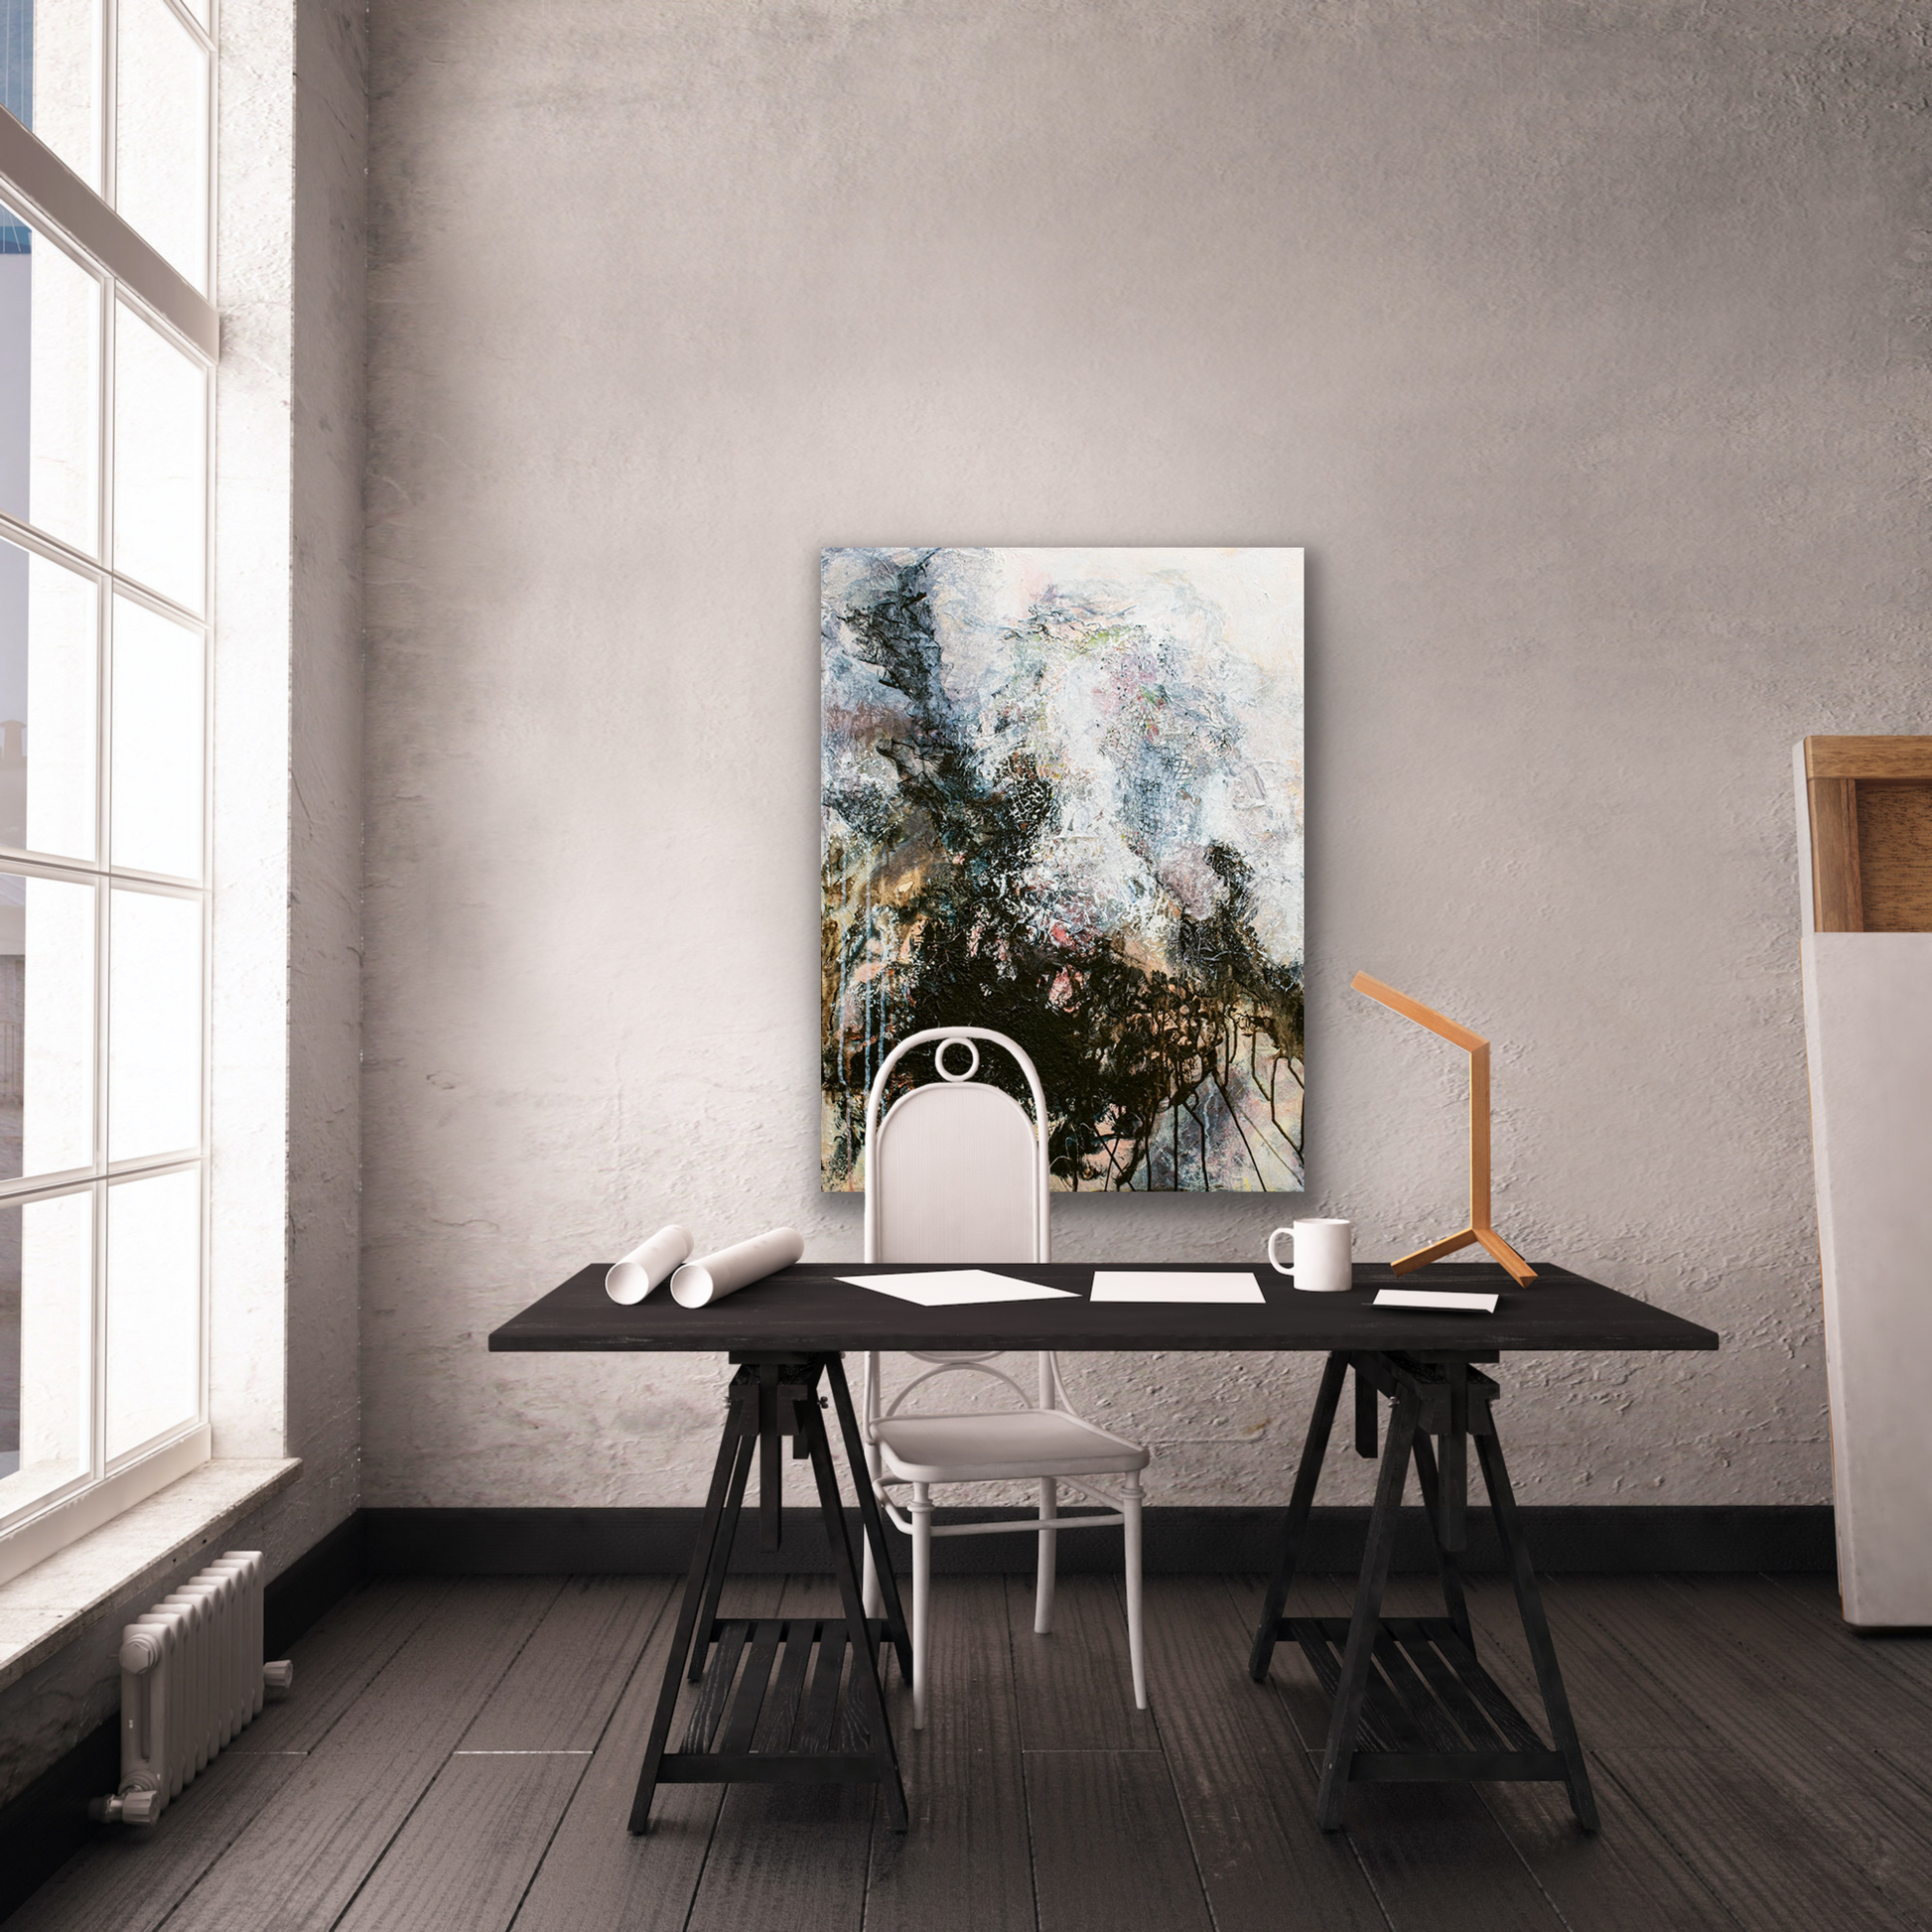 This art piece comes in three different canvas print sizes.